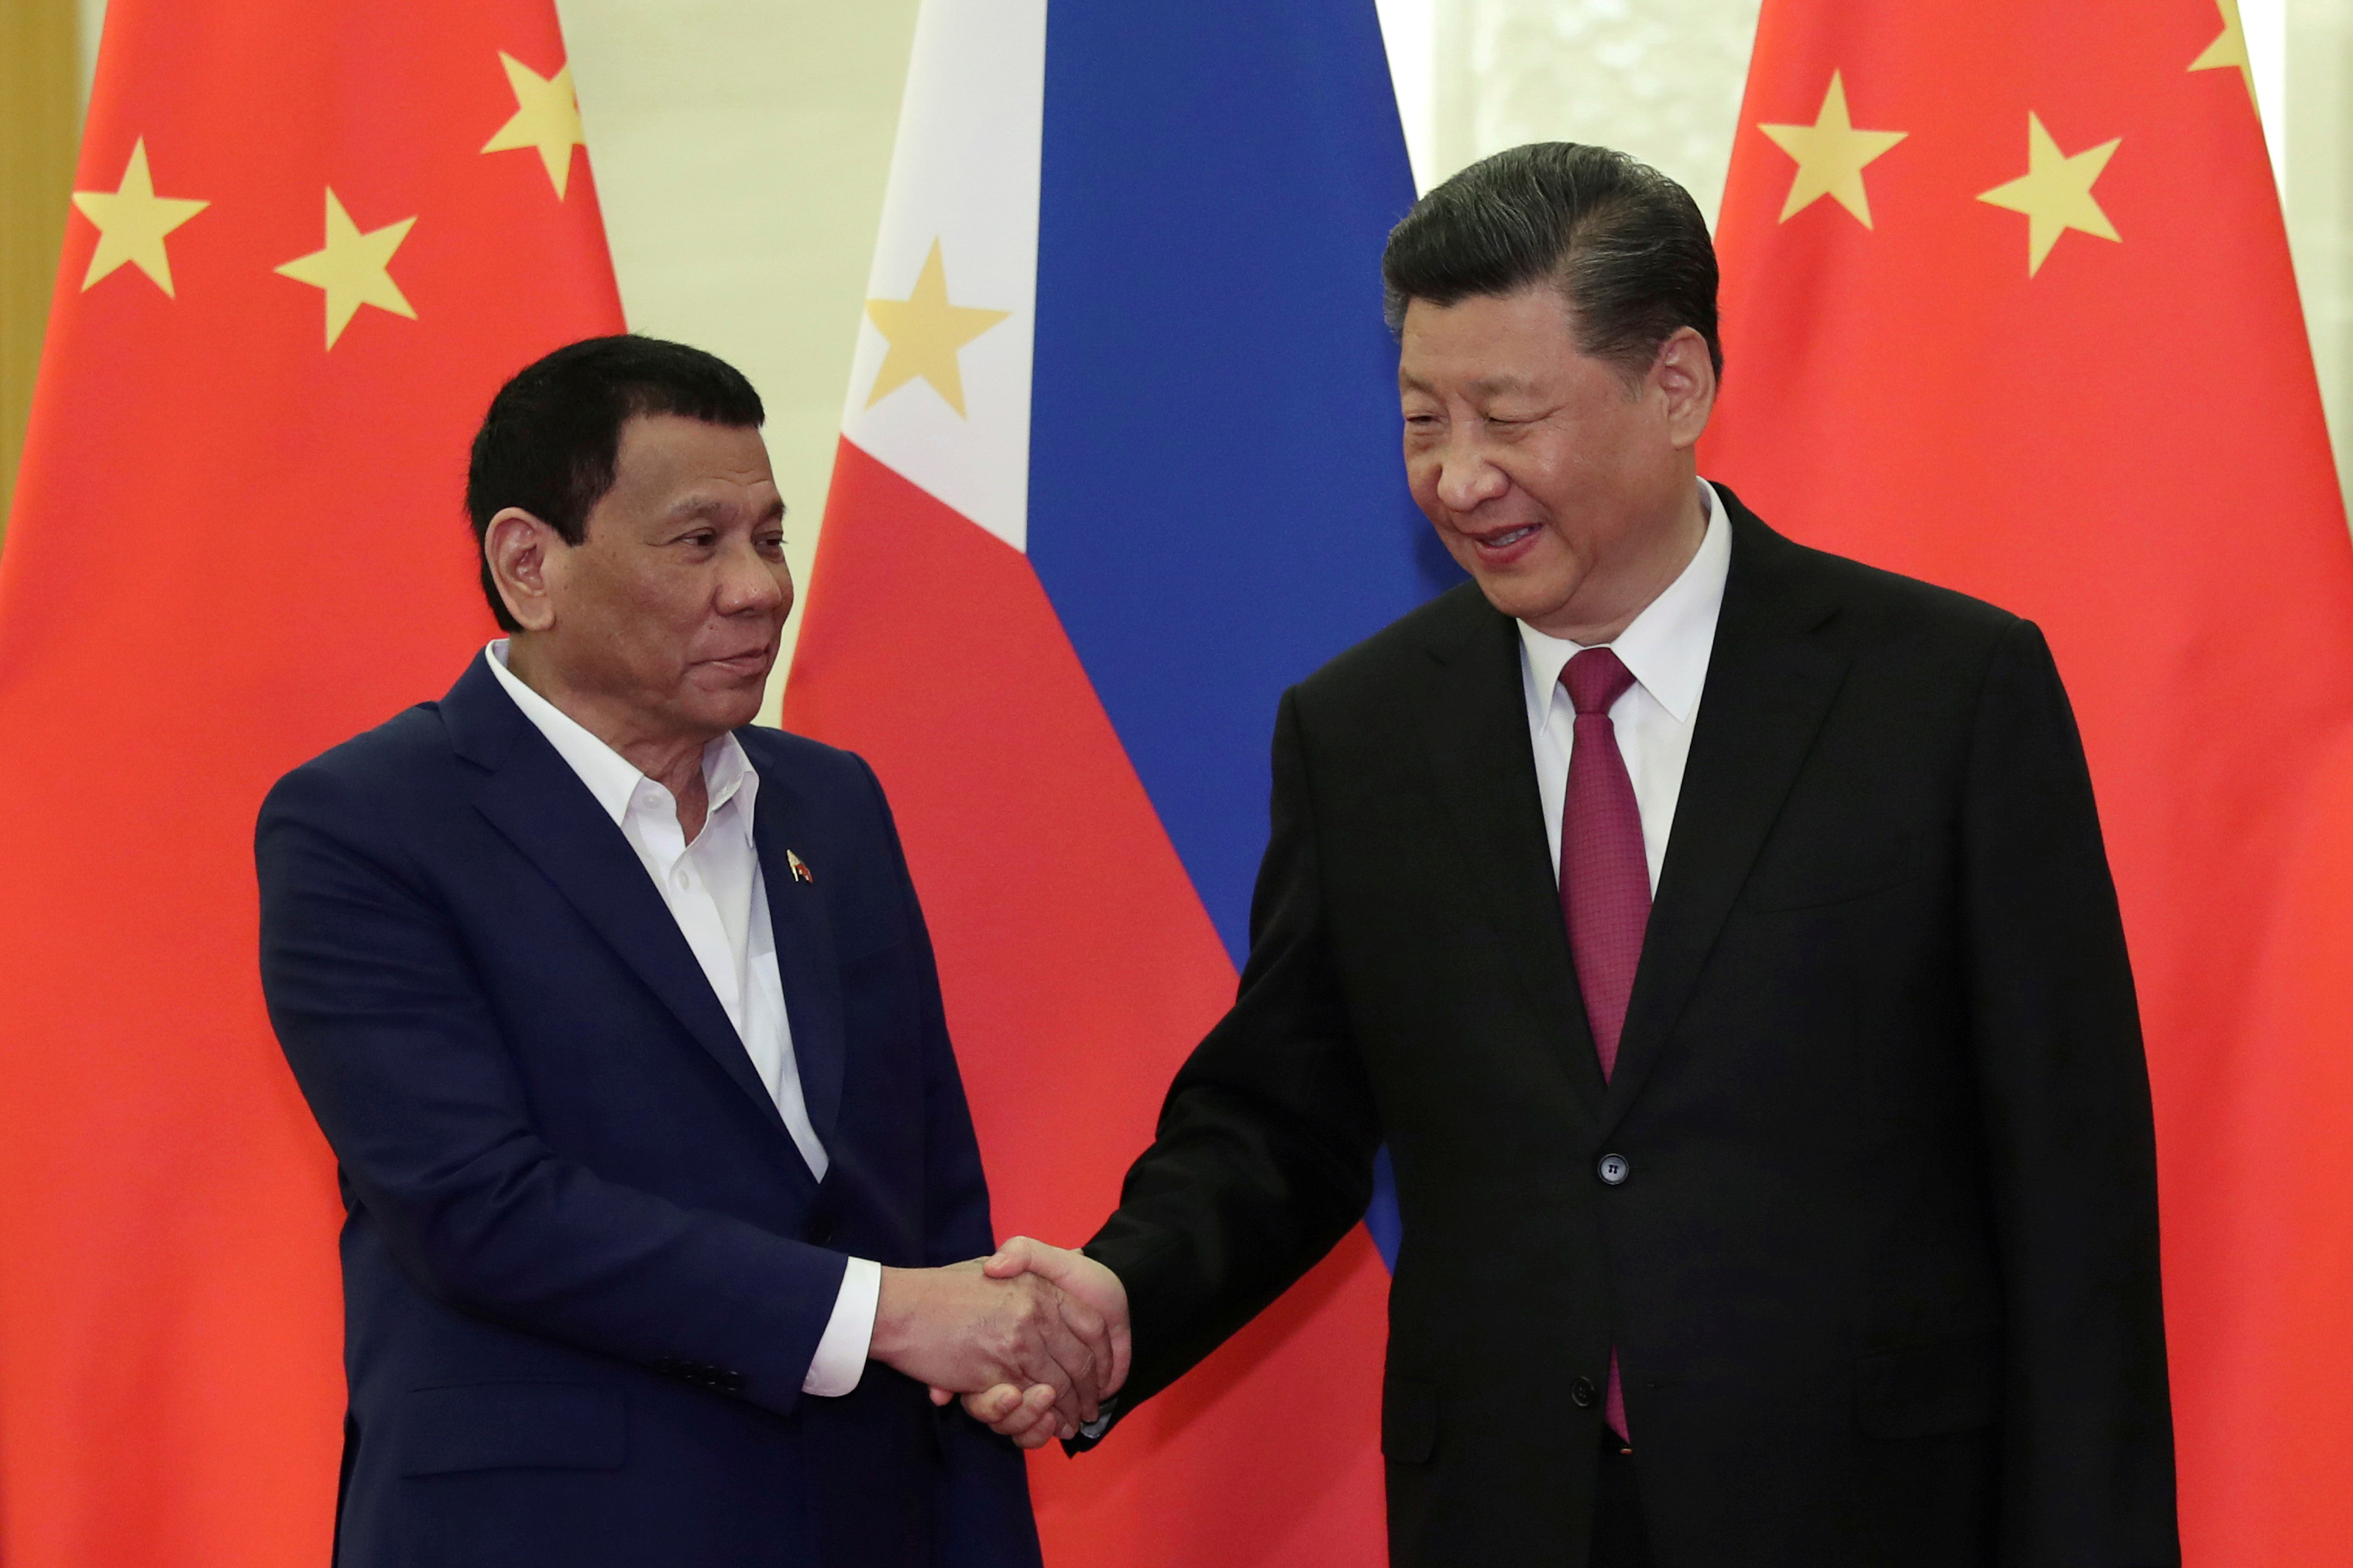 Philippine President Rodrigo Duterte shakes hands with Chinese President Xi Jinping, before the meeting at the Great Hall of People in Beijing